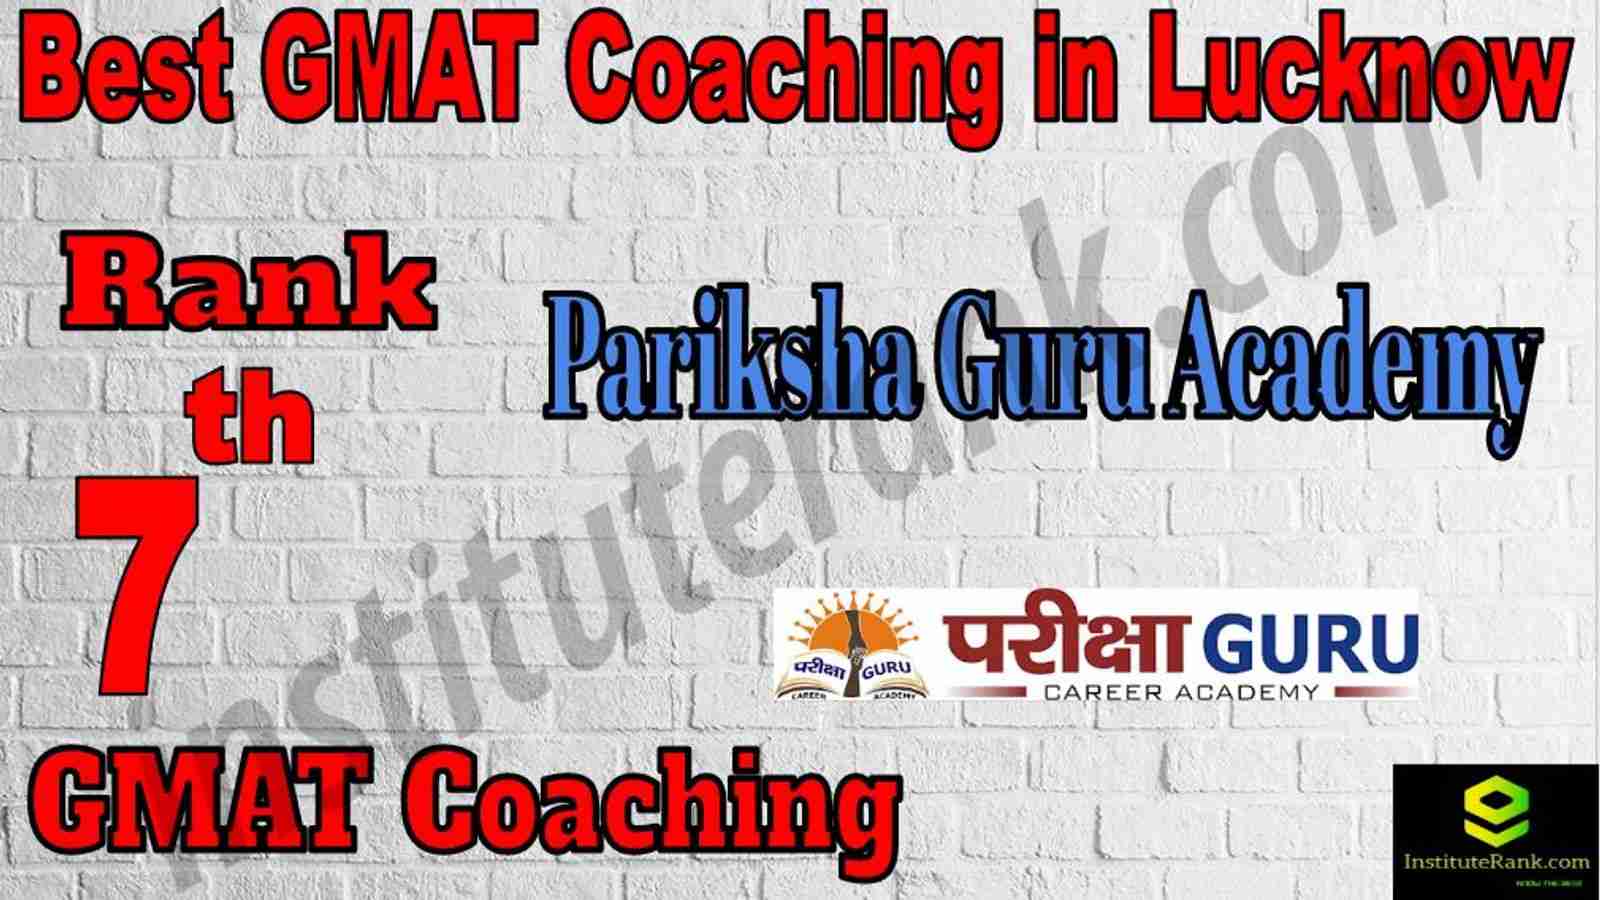 7th Best GMAT Coaching in Lucknow